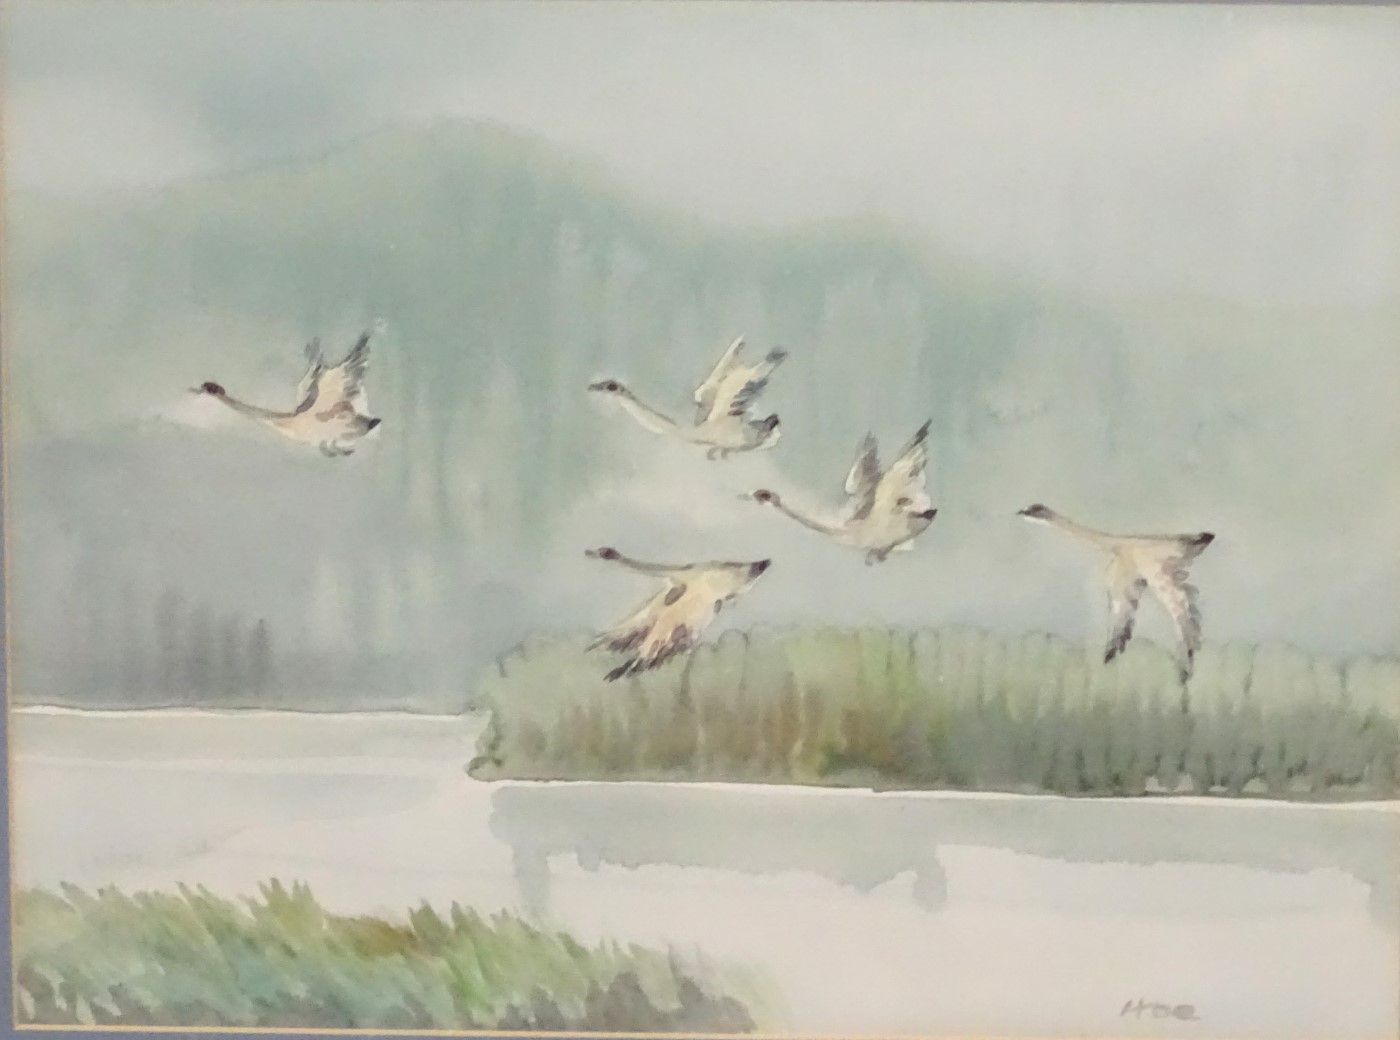 Hoe , Burmese / Singapore XX Set of three watercolours, Landscapes with wildlife, - Image 4 of 9